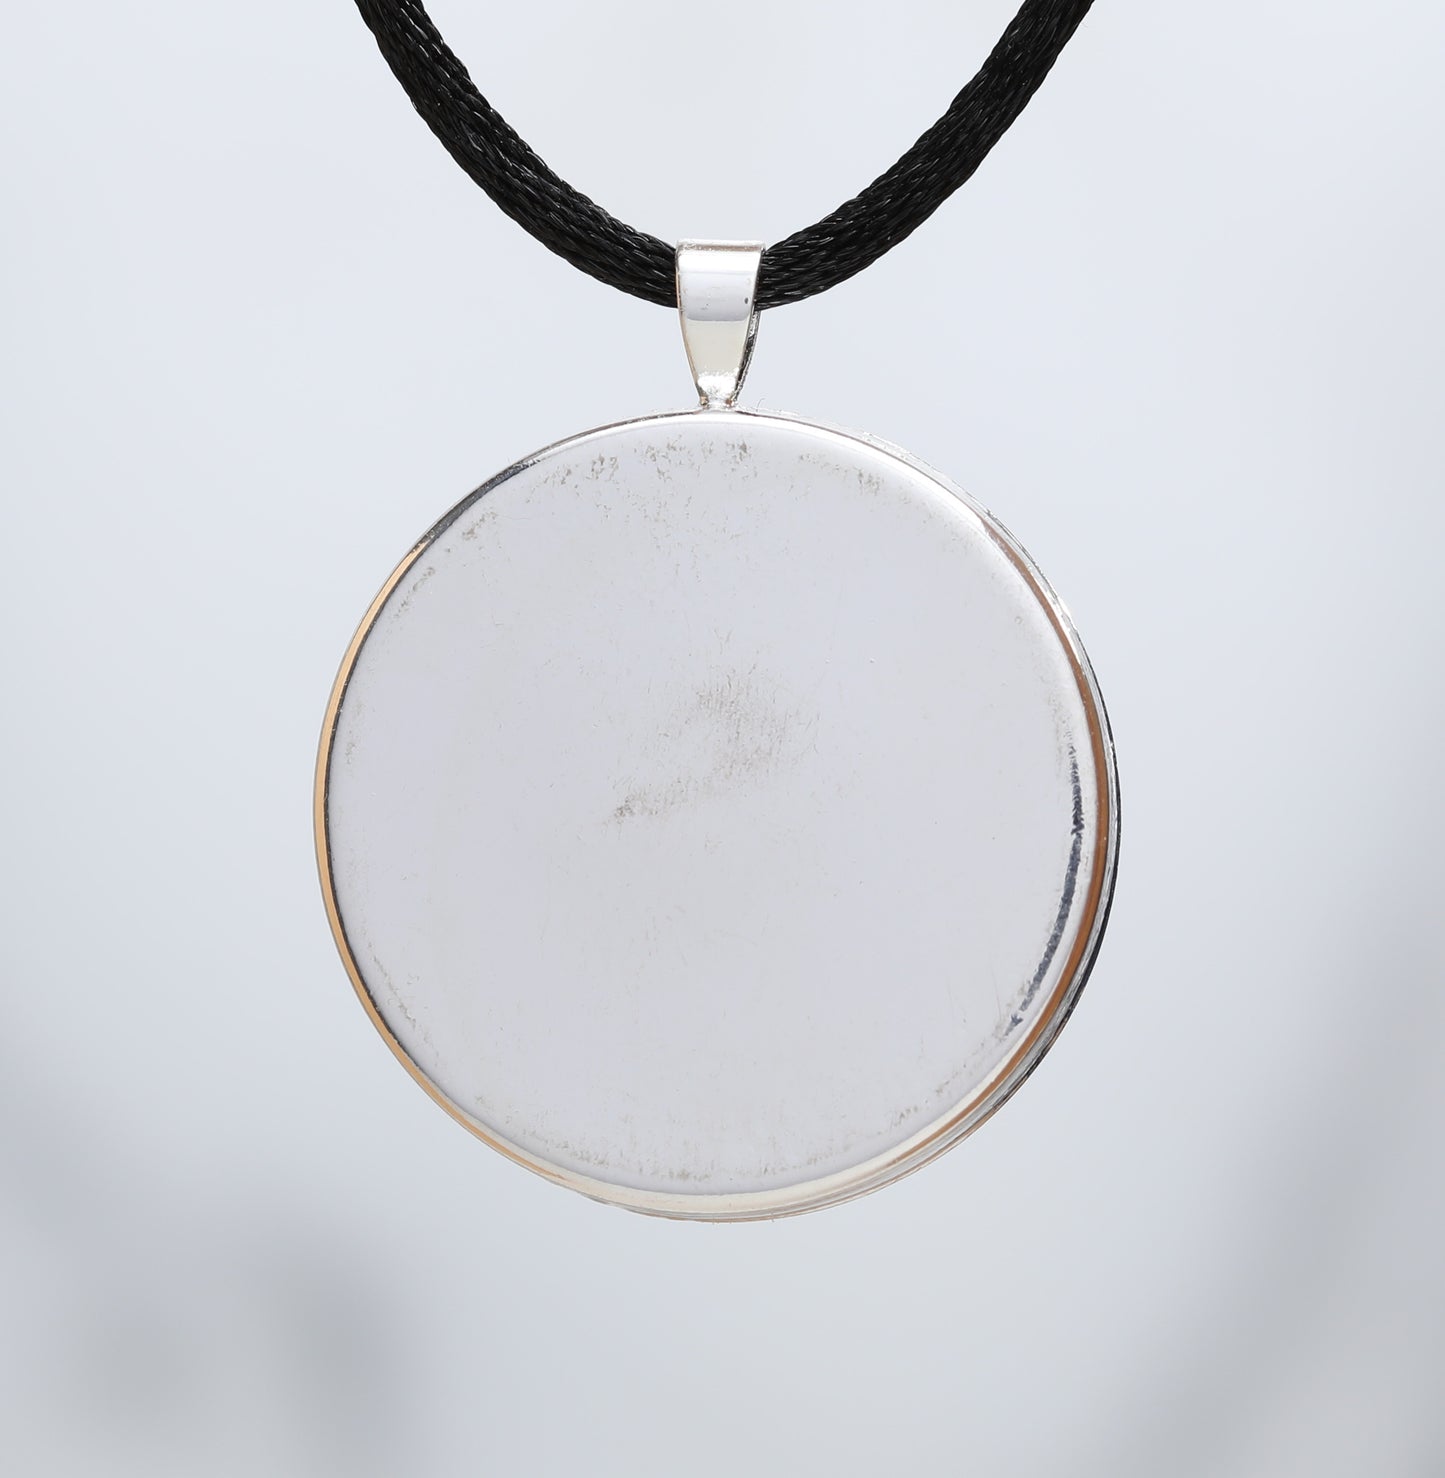 Dancing in Circles  - Glow-in-the-dark pendant with a beautiful abstract soap film pattern